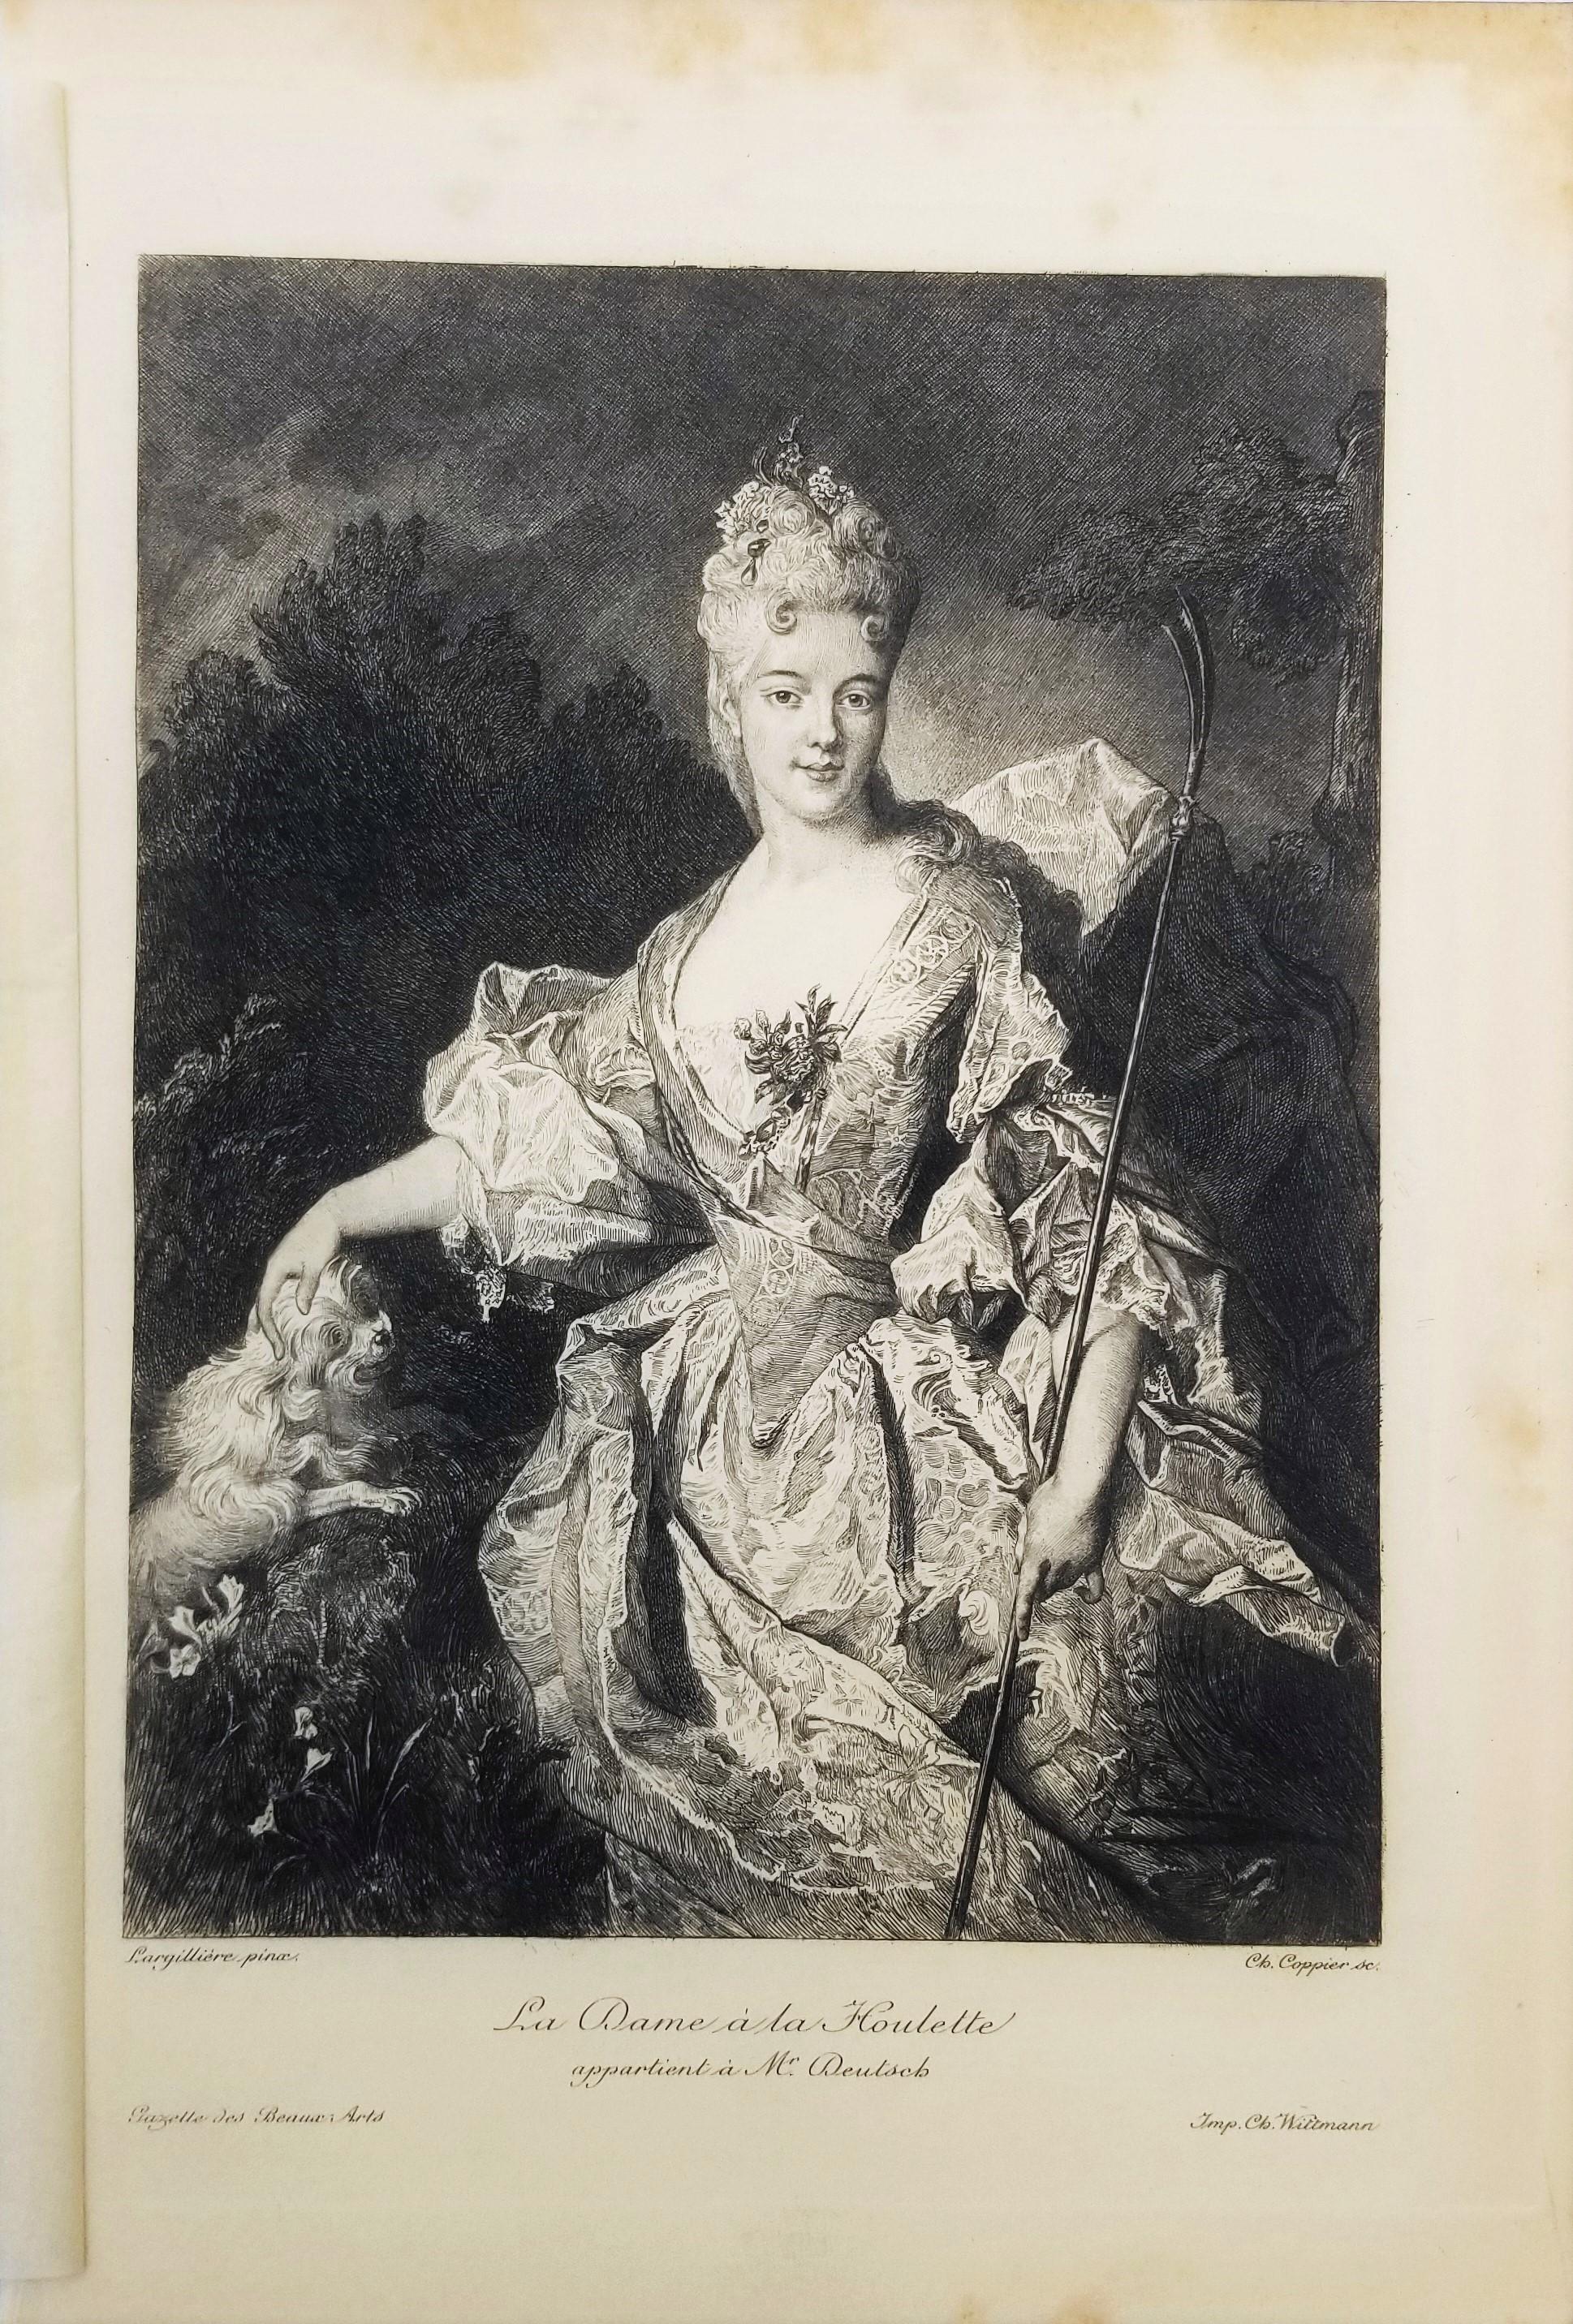 La Dame a la Houlette (The Lady at the Houlette) - Print by André-Charles Coppier